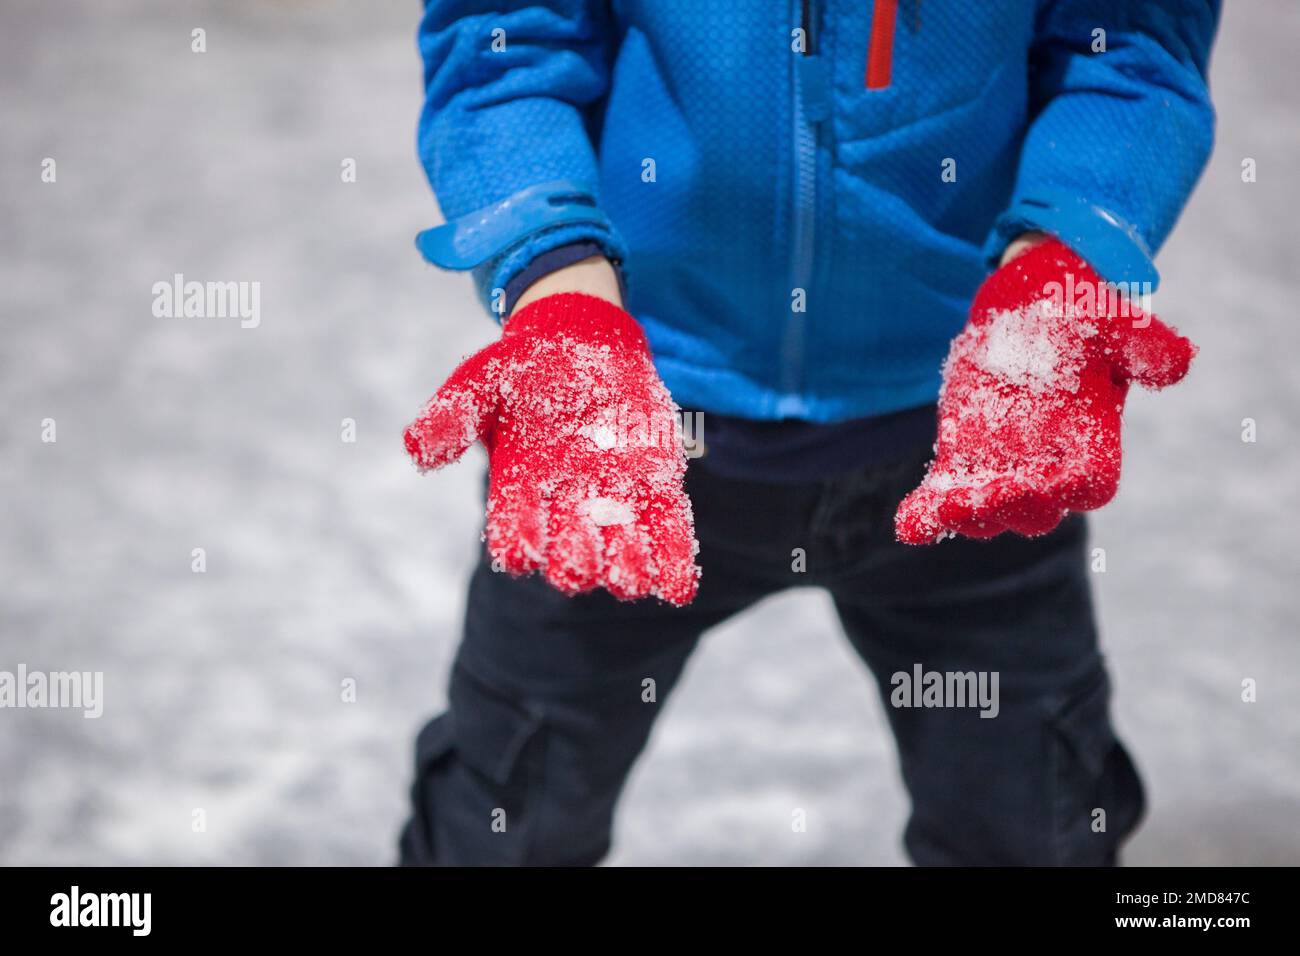 Child boy show his gloves full of ice. Recreational ice rink concept Stock Photo